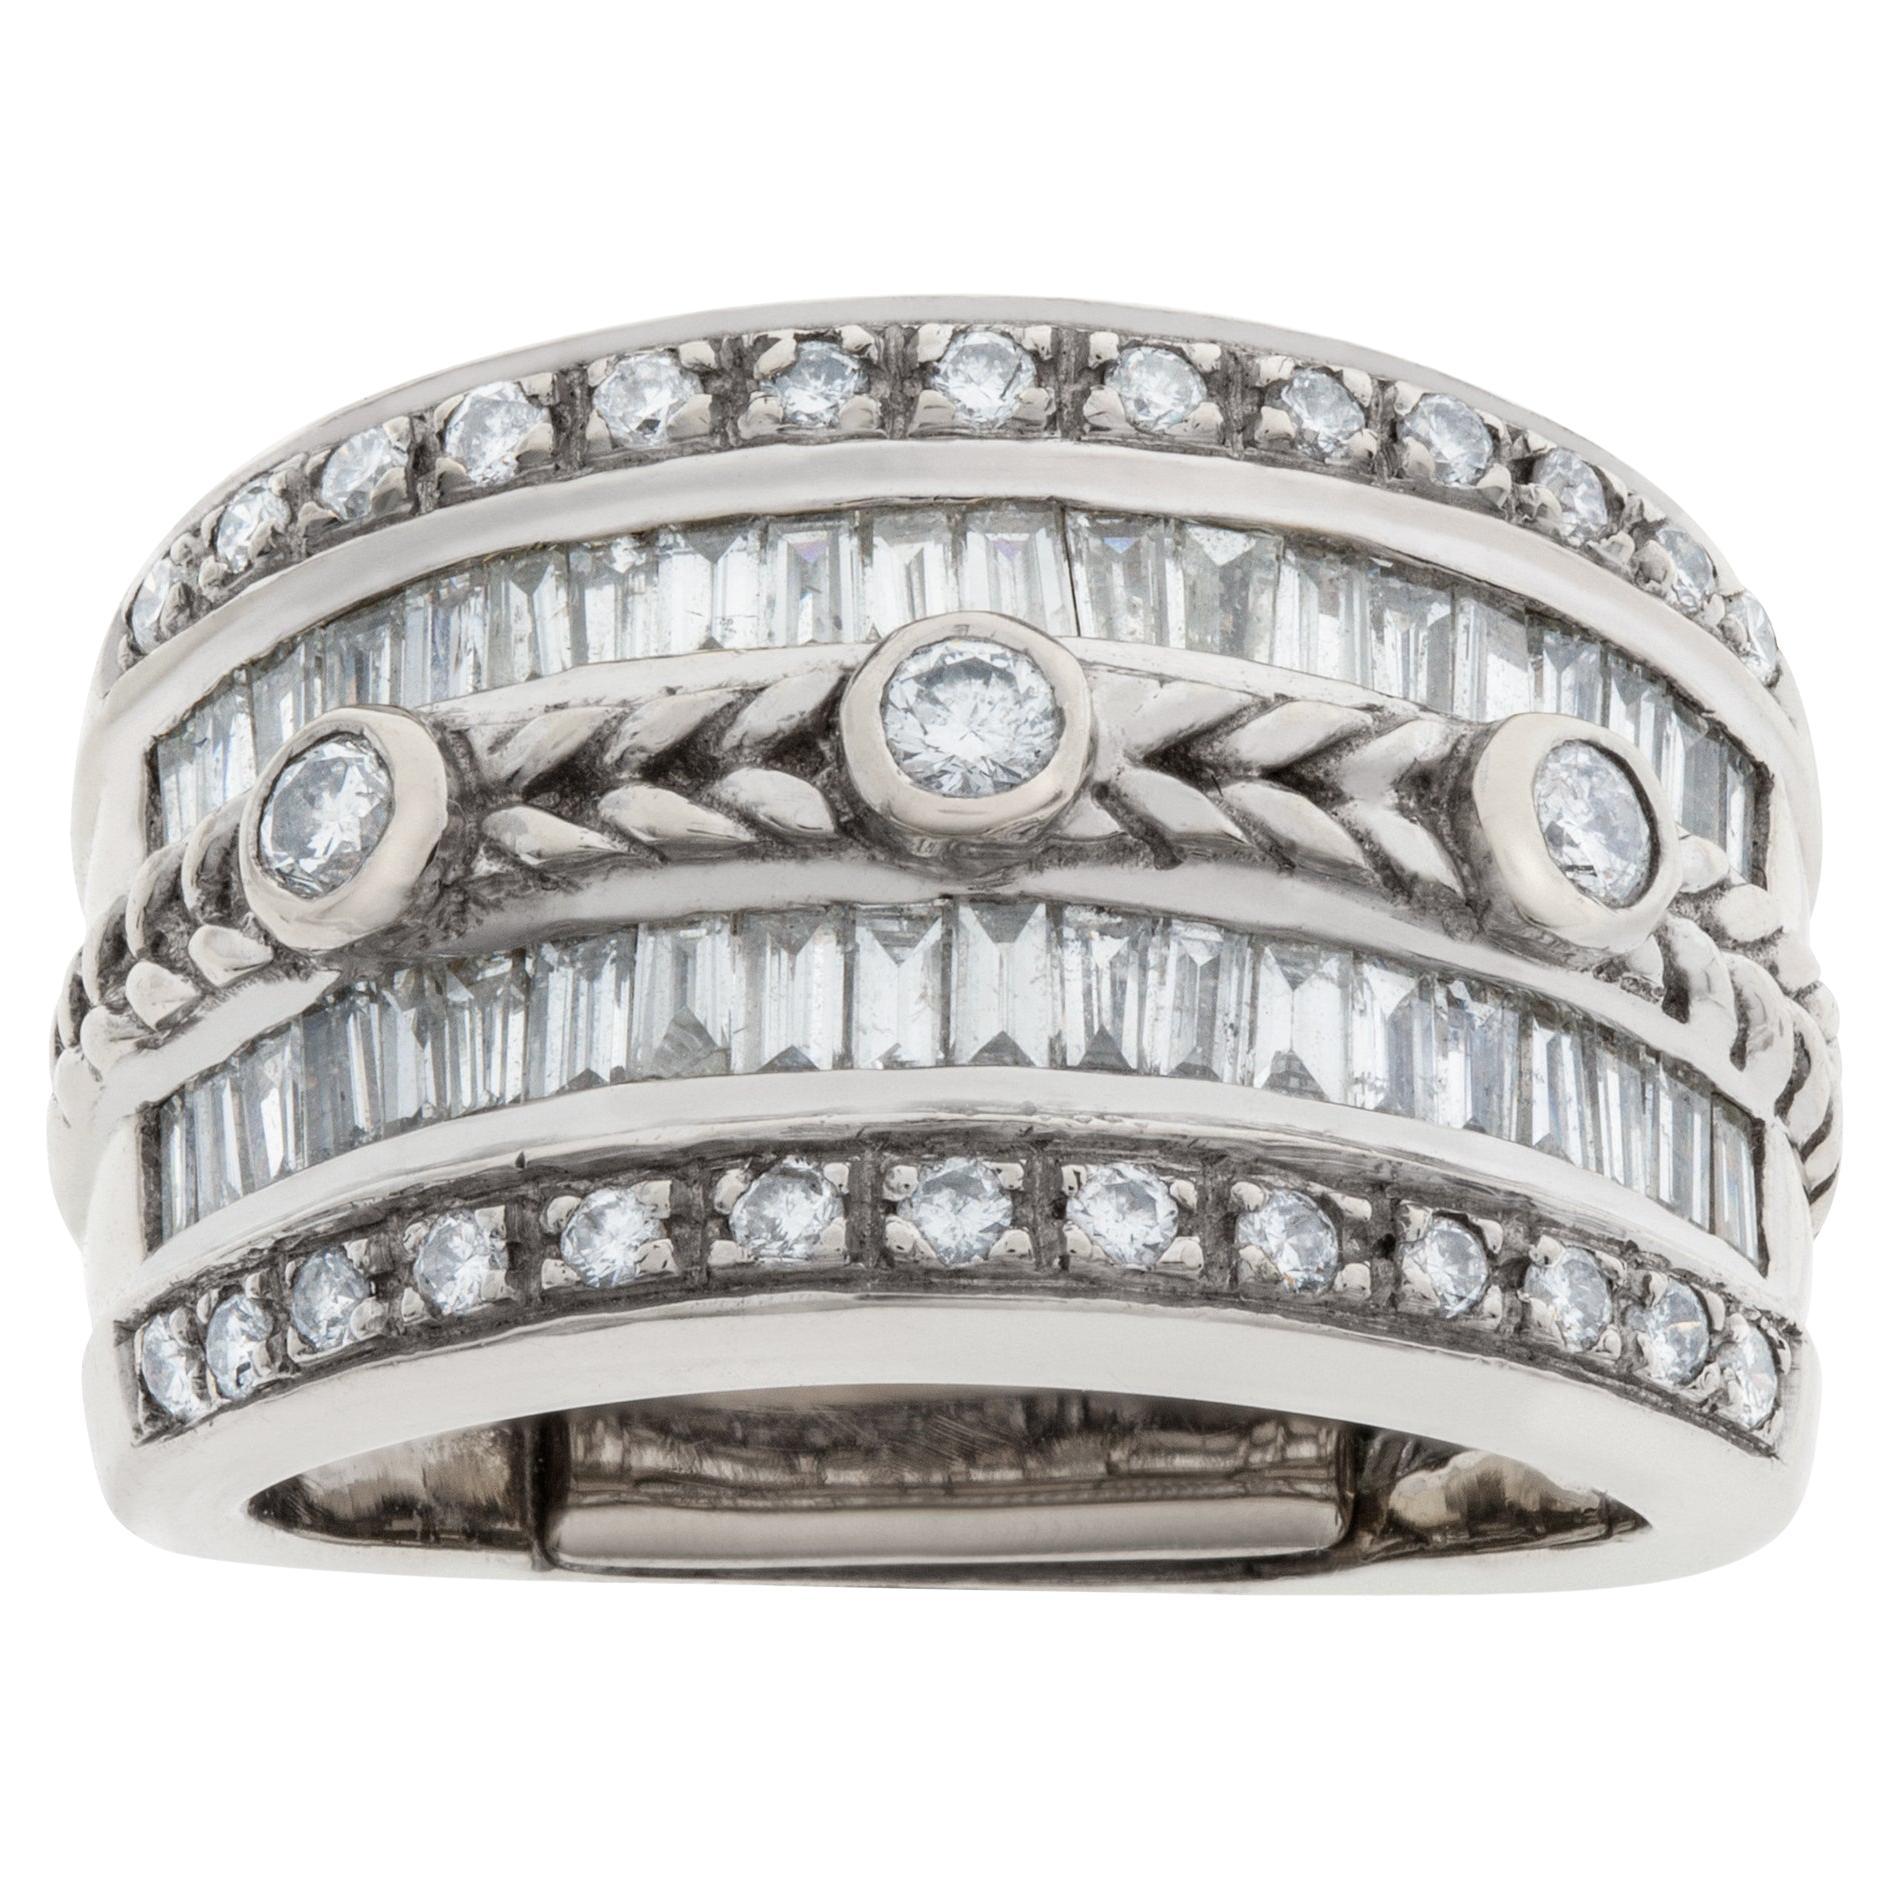 Ring with App, 1.25 Carats in Round and Baguette Diamonds, 18k White Gold For Sale